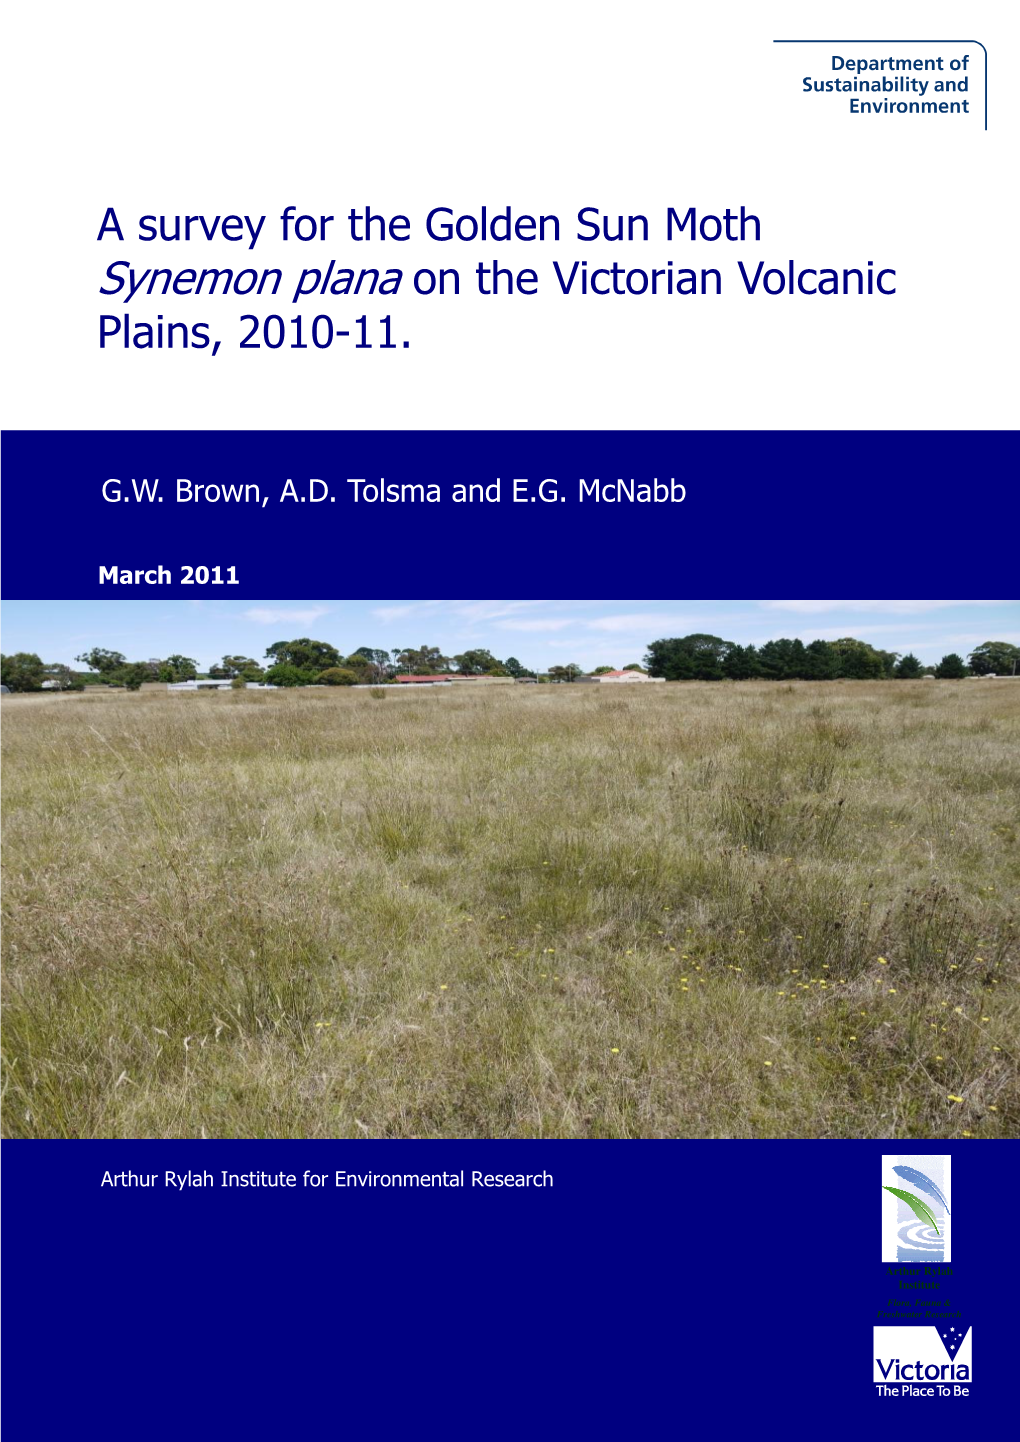 A Survey for the Golden Sun Moth Synemon Plana on the Victorian Volcanic Plains, 2010-11